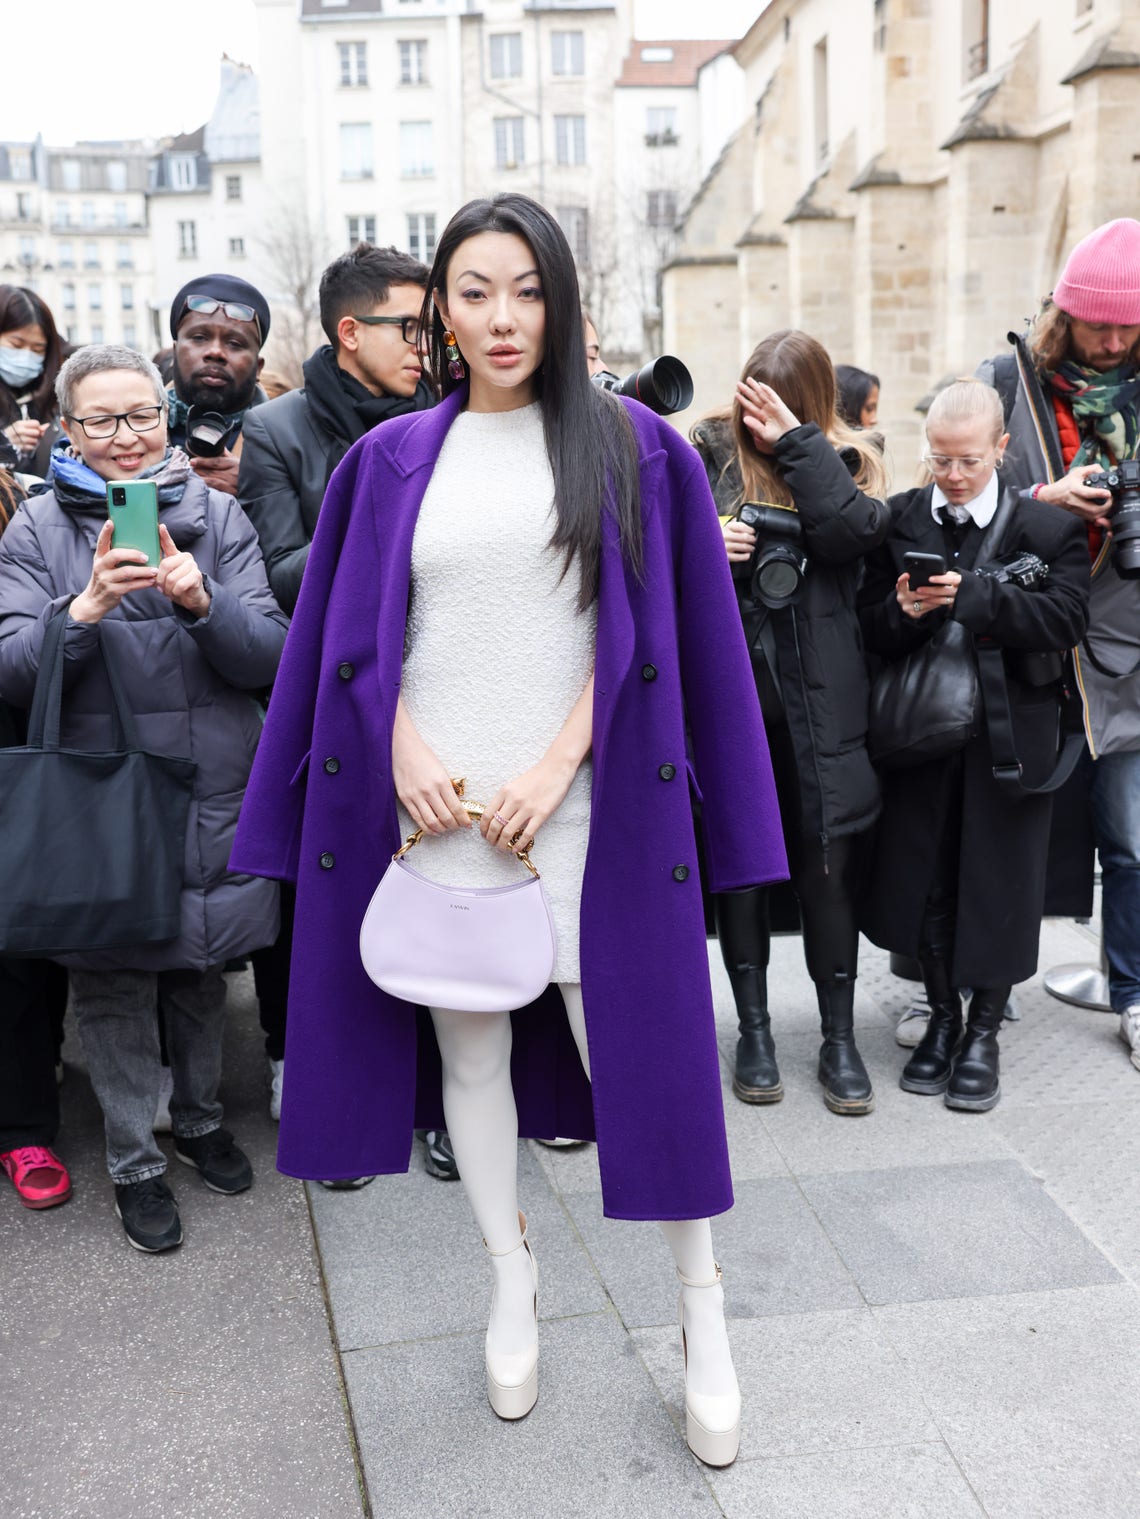 Celebs Love Chanel and Chloé Bags, but a New Alexander Wang Style